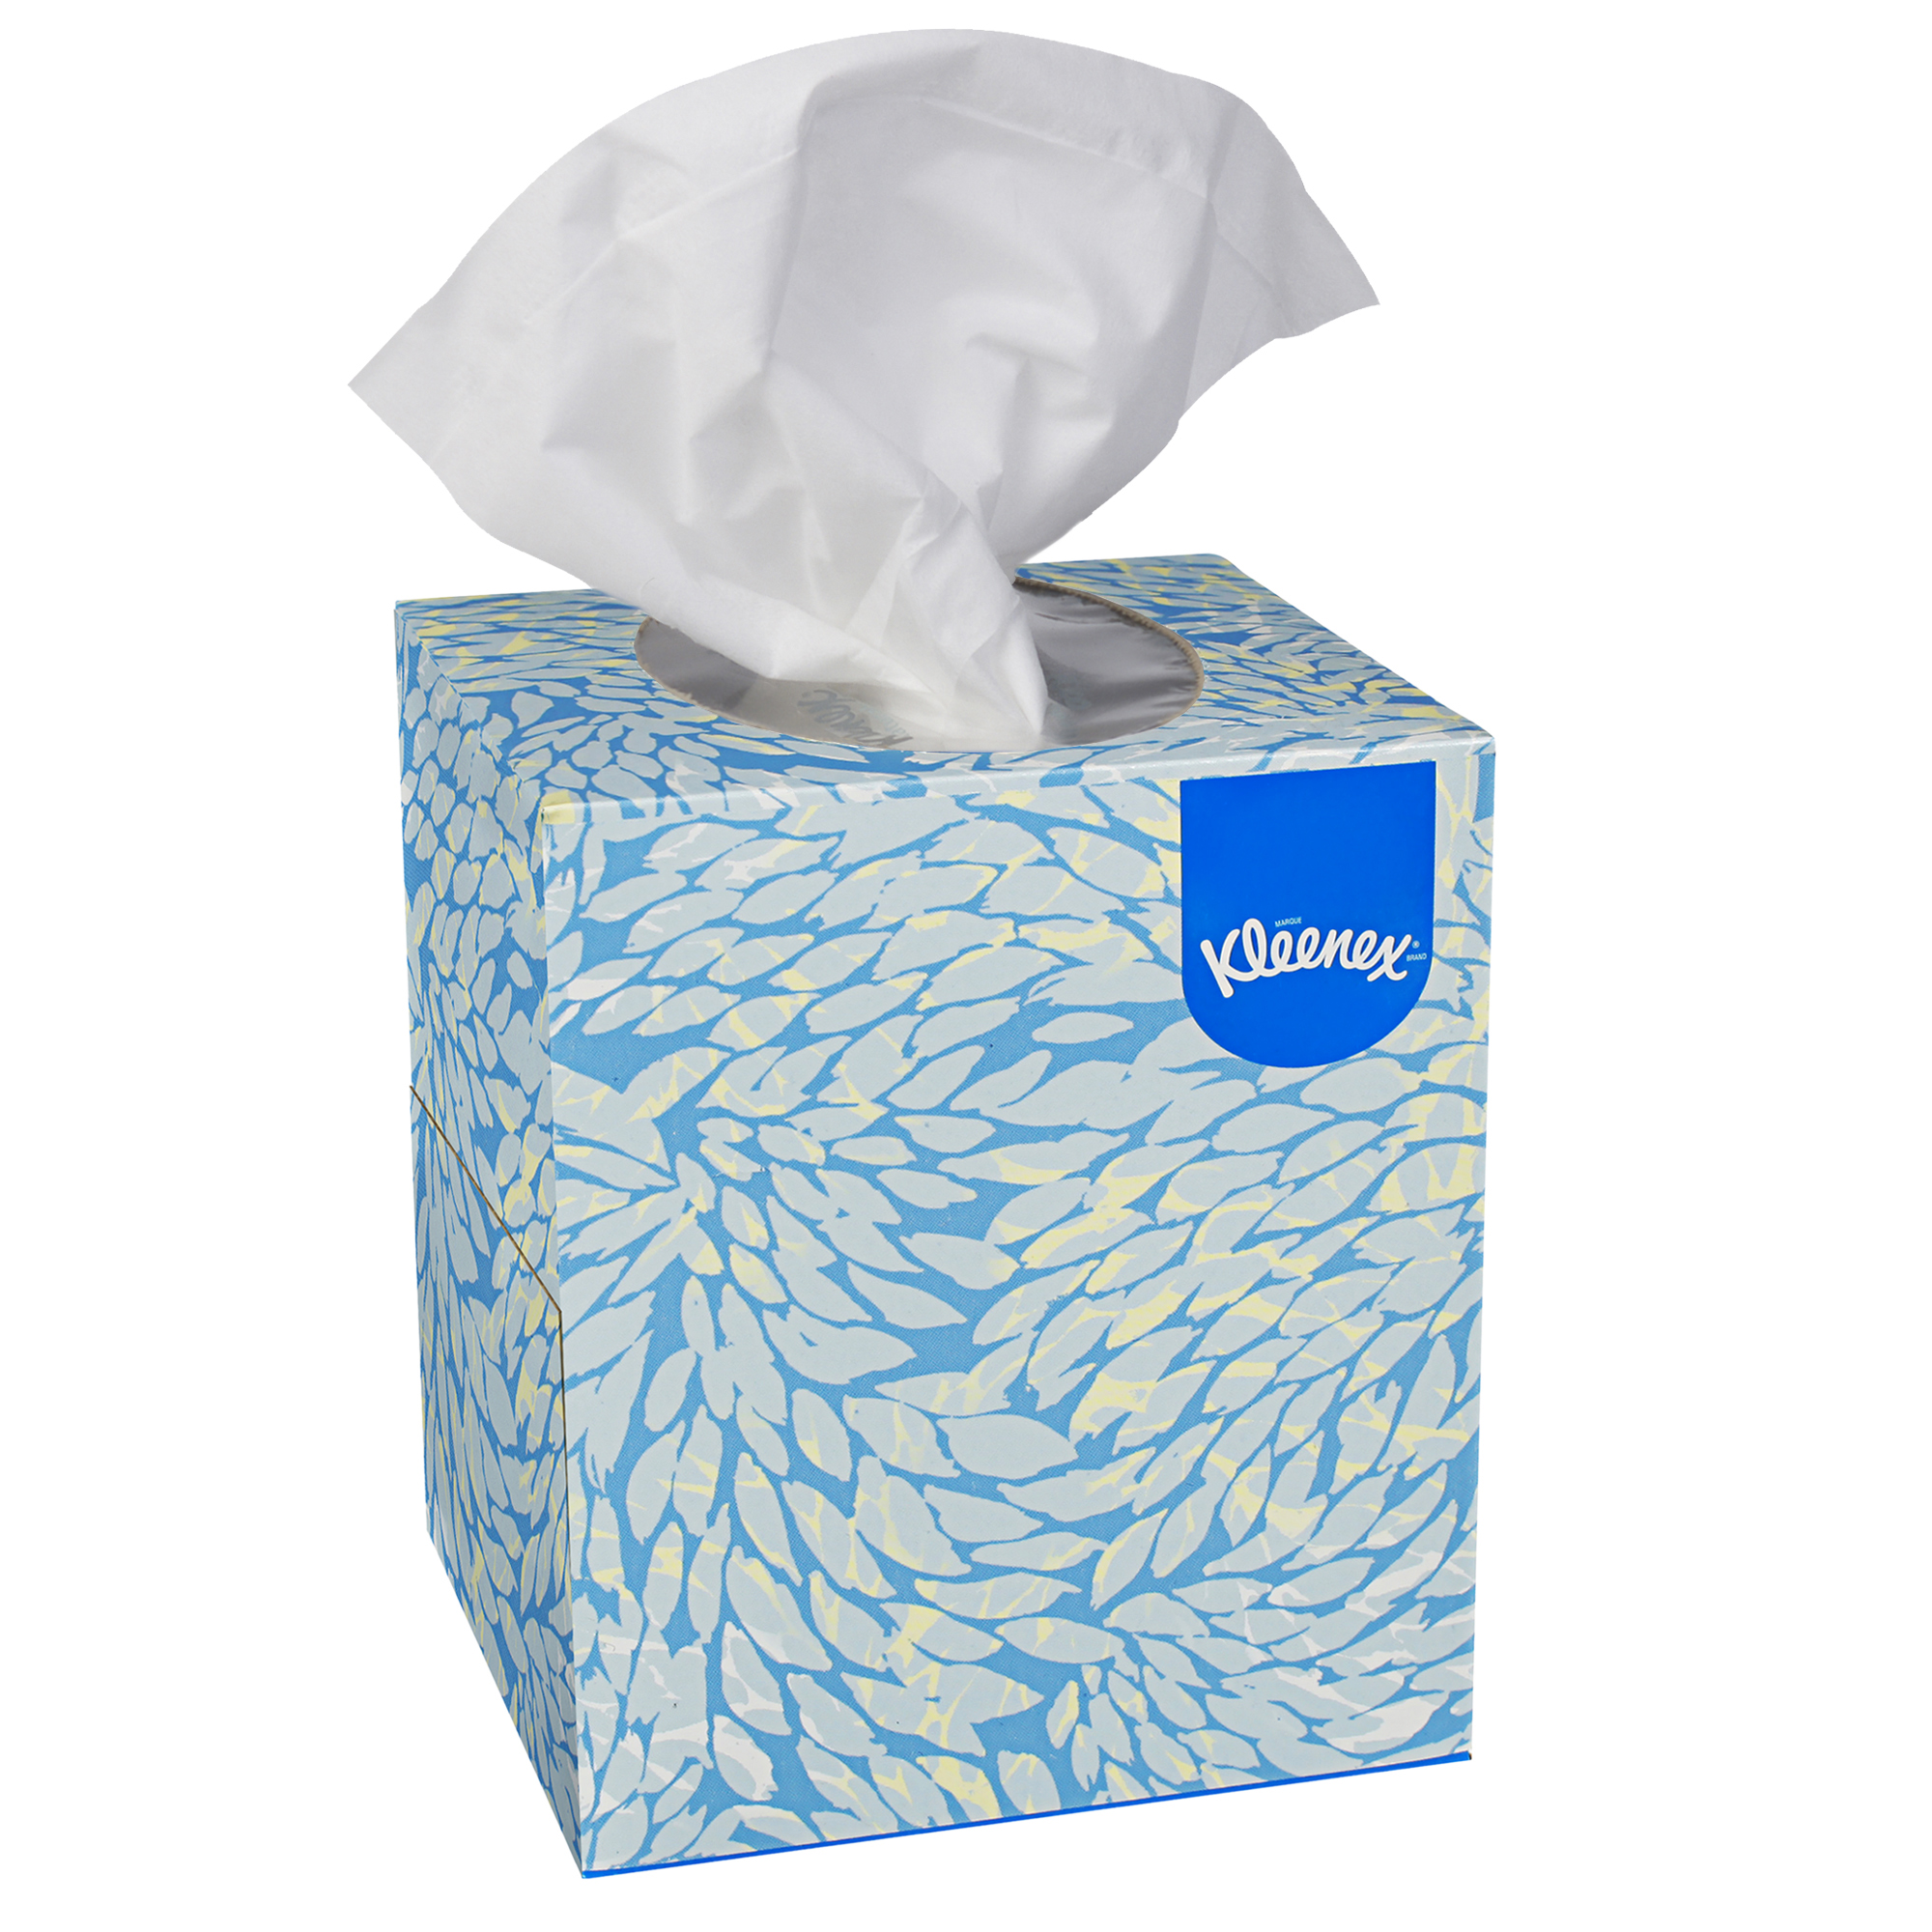 Picture of Kleenex Facial Tissue, 2-Ply, Pop-Up Box, White, 95/Box, 6 Boxes/Pack